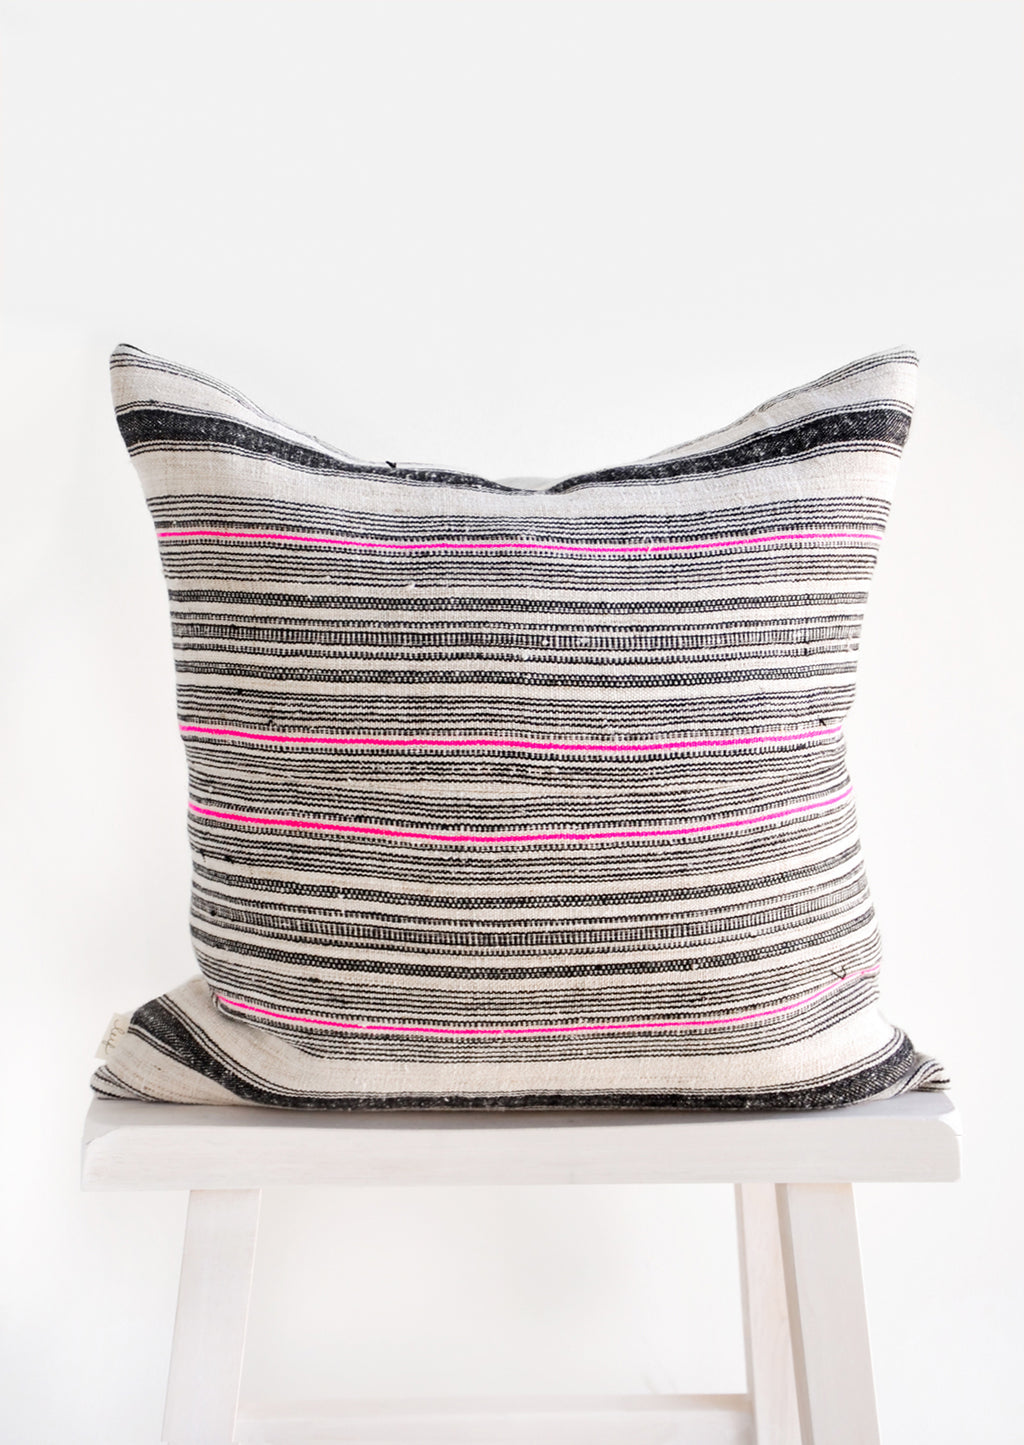 2: Square throw pillow in natural hemp fabric with varied stripes in black and hot pink